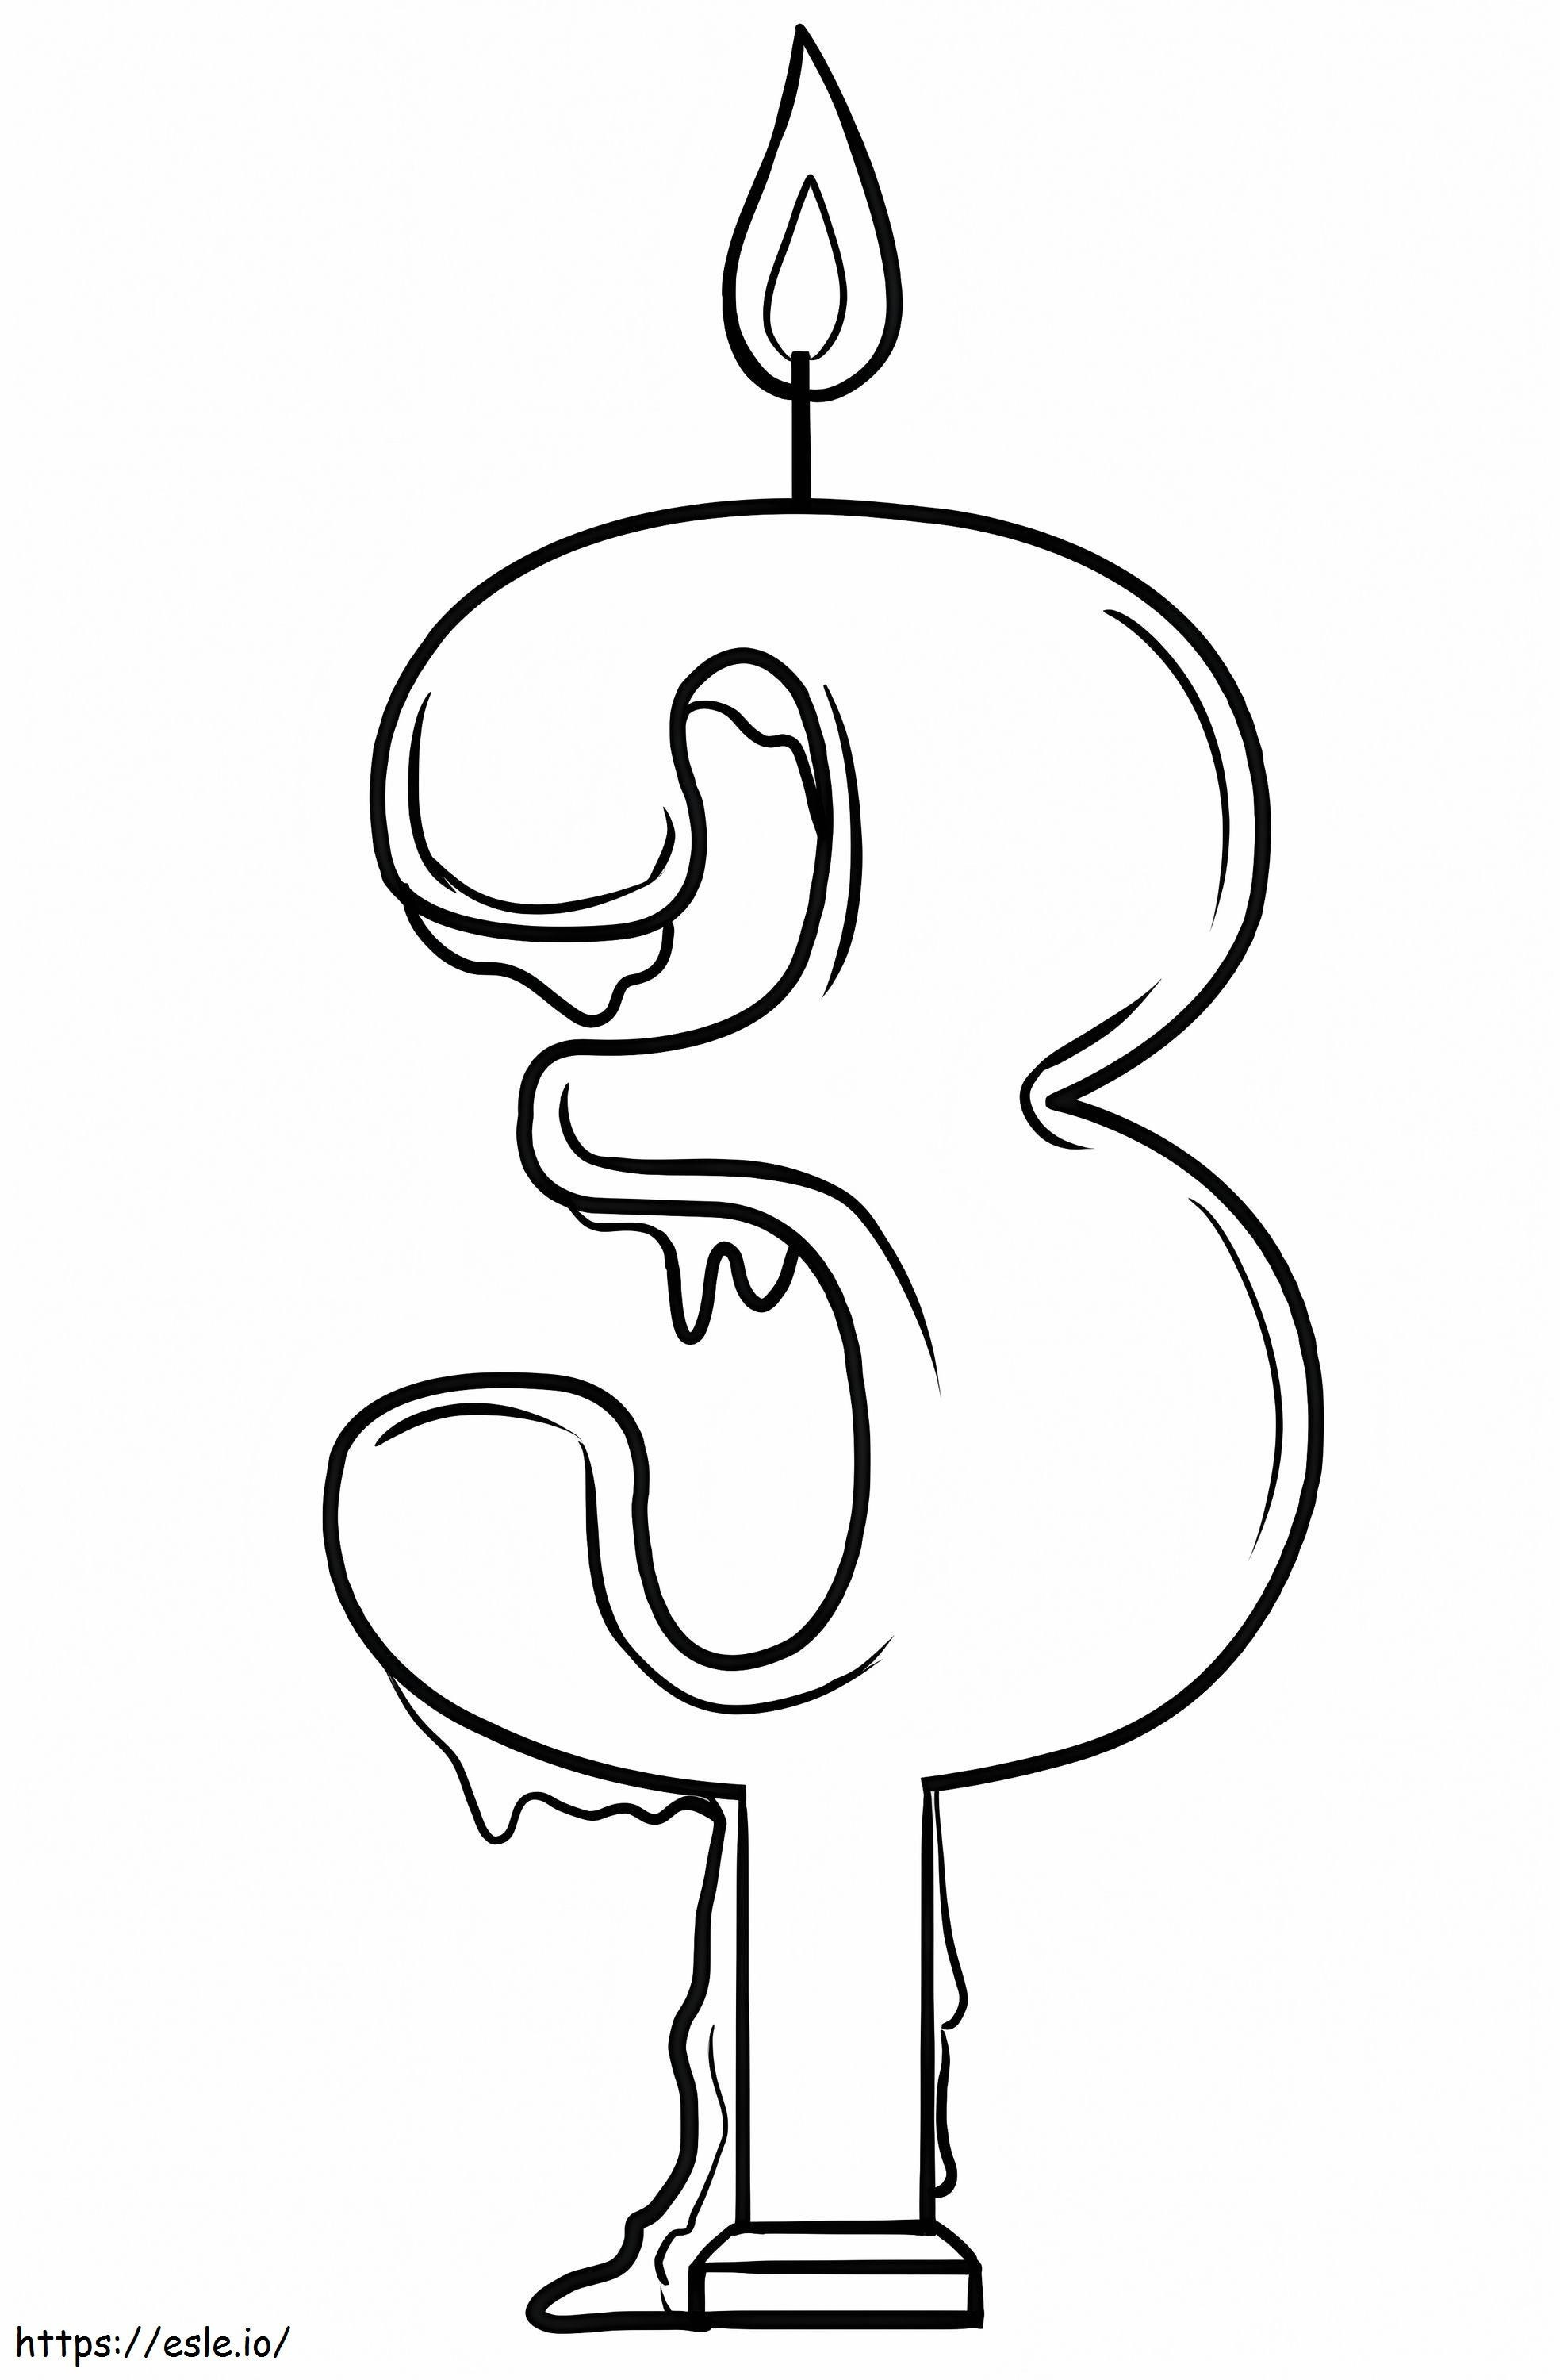 Free Printable Number 3 coloring page